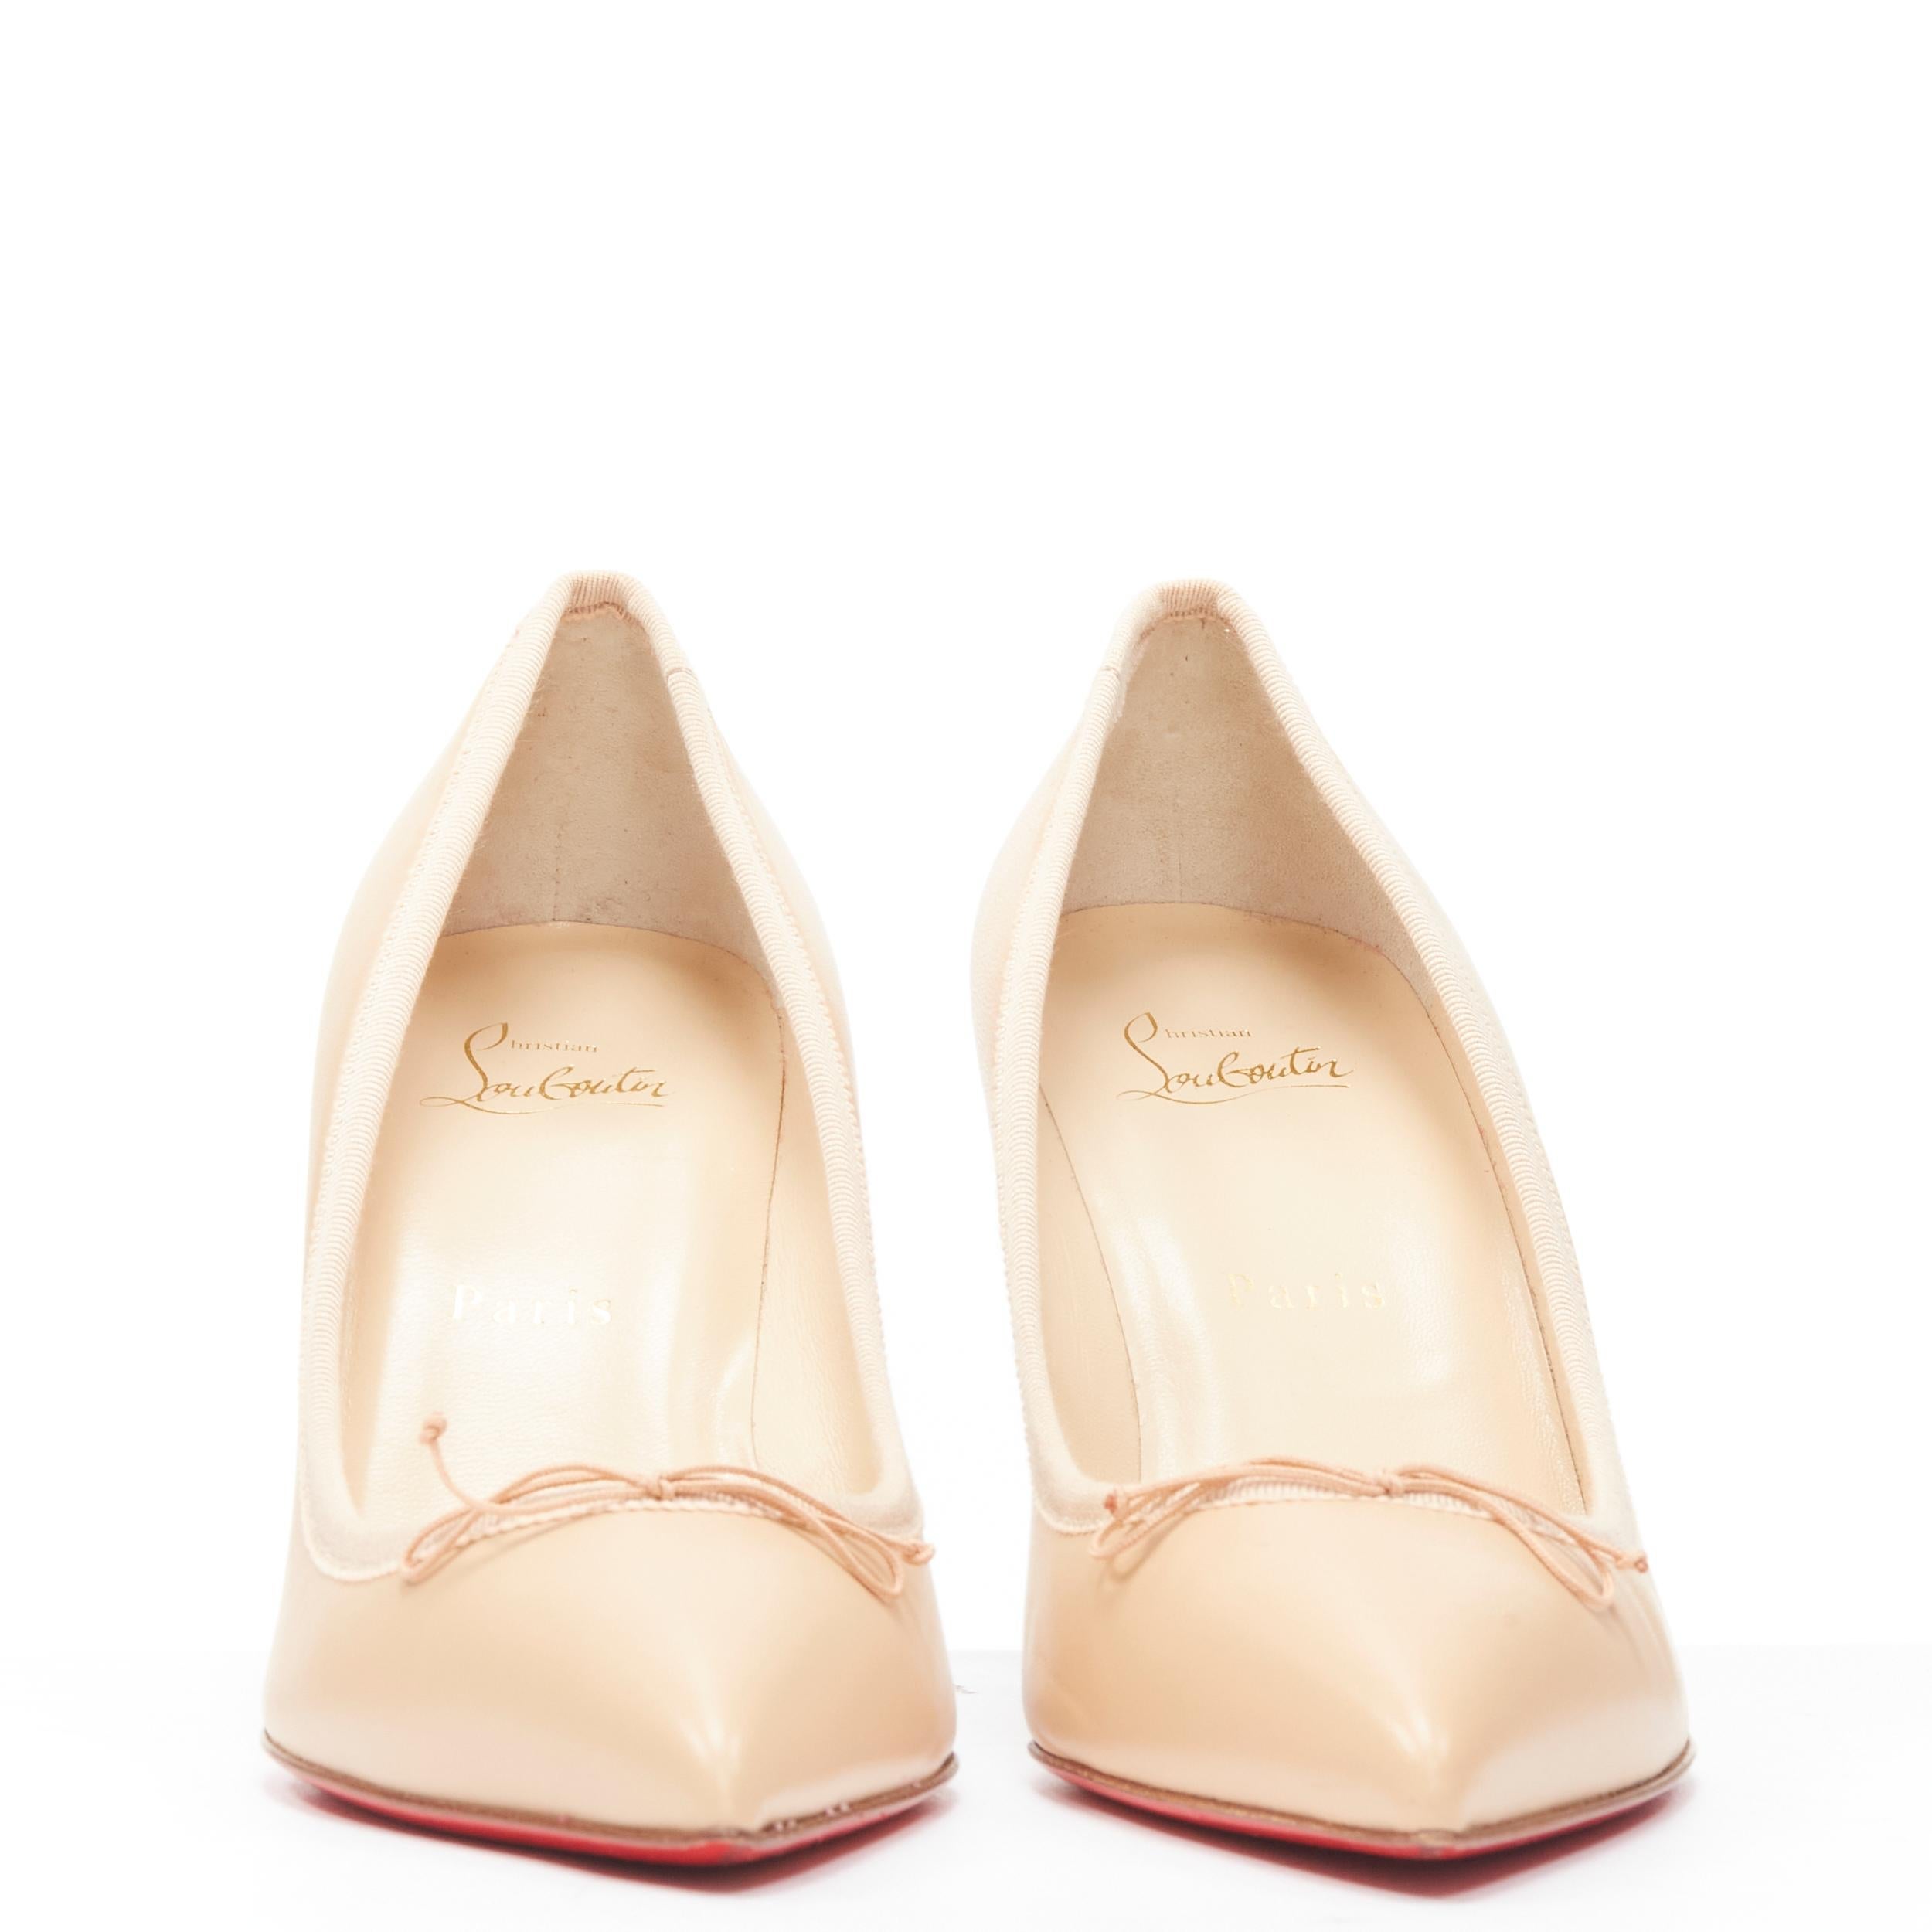 CHRISTIAN LOUBOUTIN Solasofia 85 nude beige grosgrain bow pump EU37.5 
Reference: TGAS/A03714 
Brand: Christian Louboutin 
Model: Solasofia 85 
Material: Leather 
Color: Beige 
Pattern: Solid 
Extra Detail: Bow detail at vamp. 
Made in: Italy